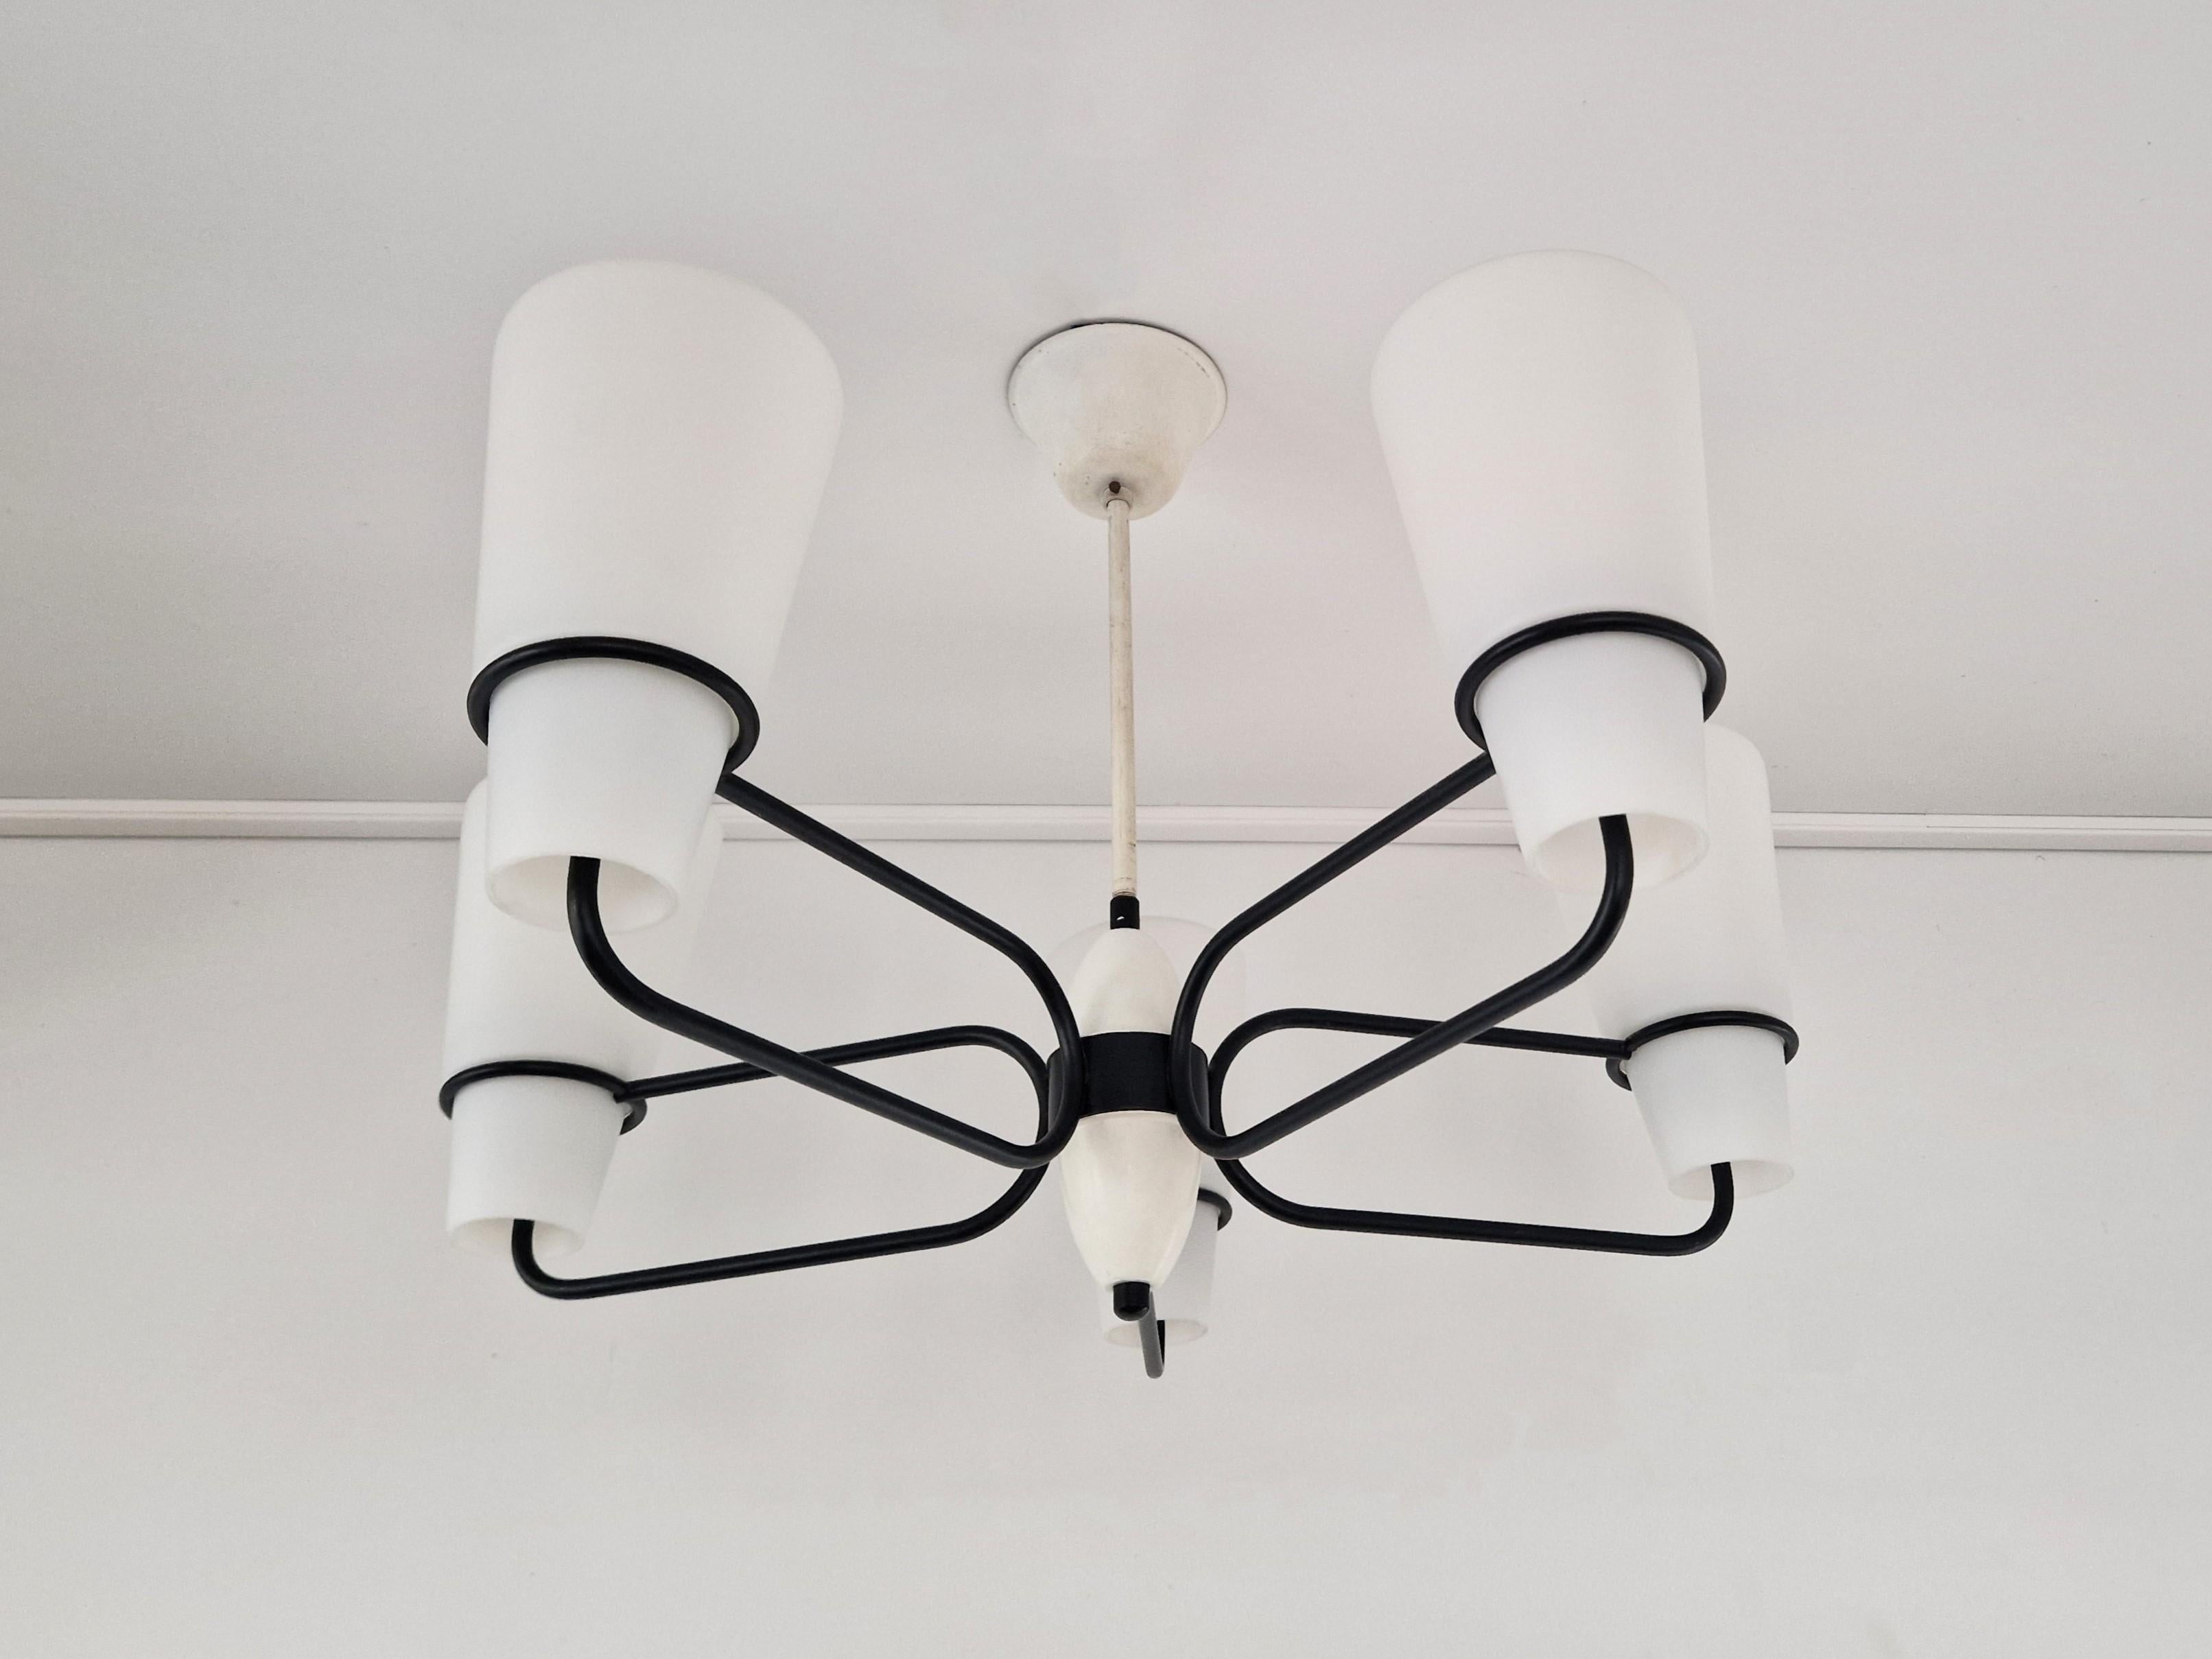 This is a very elegant chandelier from the 1950's or 1960's. It has black painted arms holding 5 opaline glass chalices that gives a beautiful diffused illumination. It is very likely a Dutch design with Italian influences. A very modern and